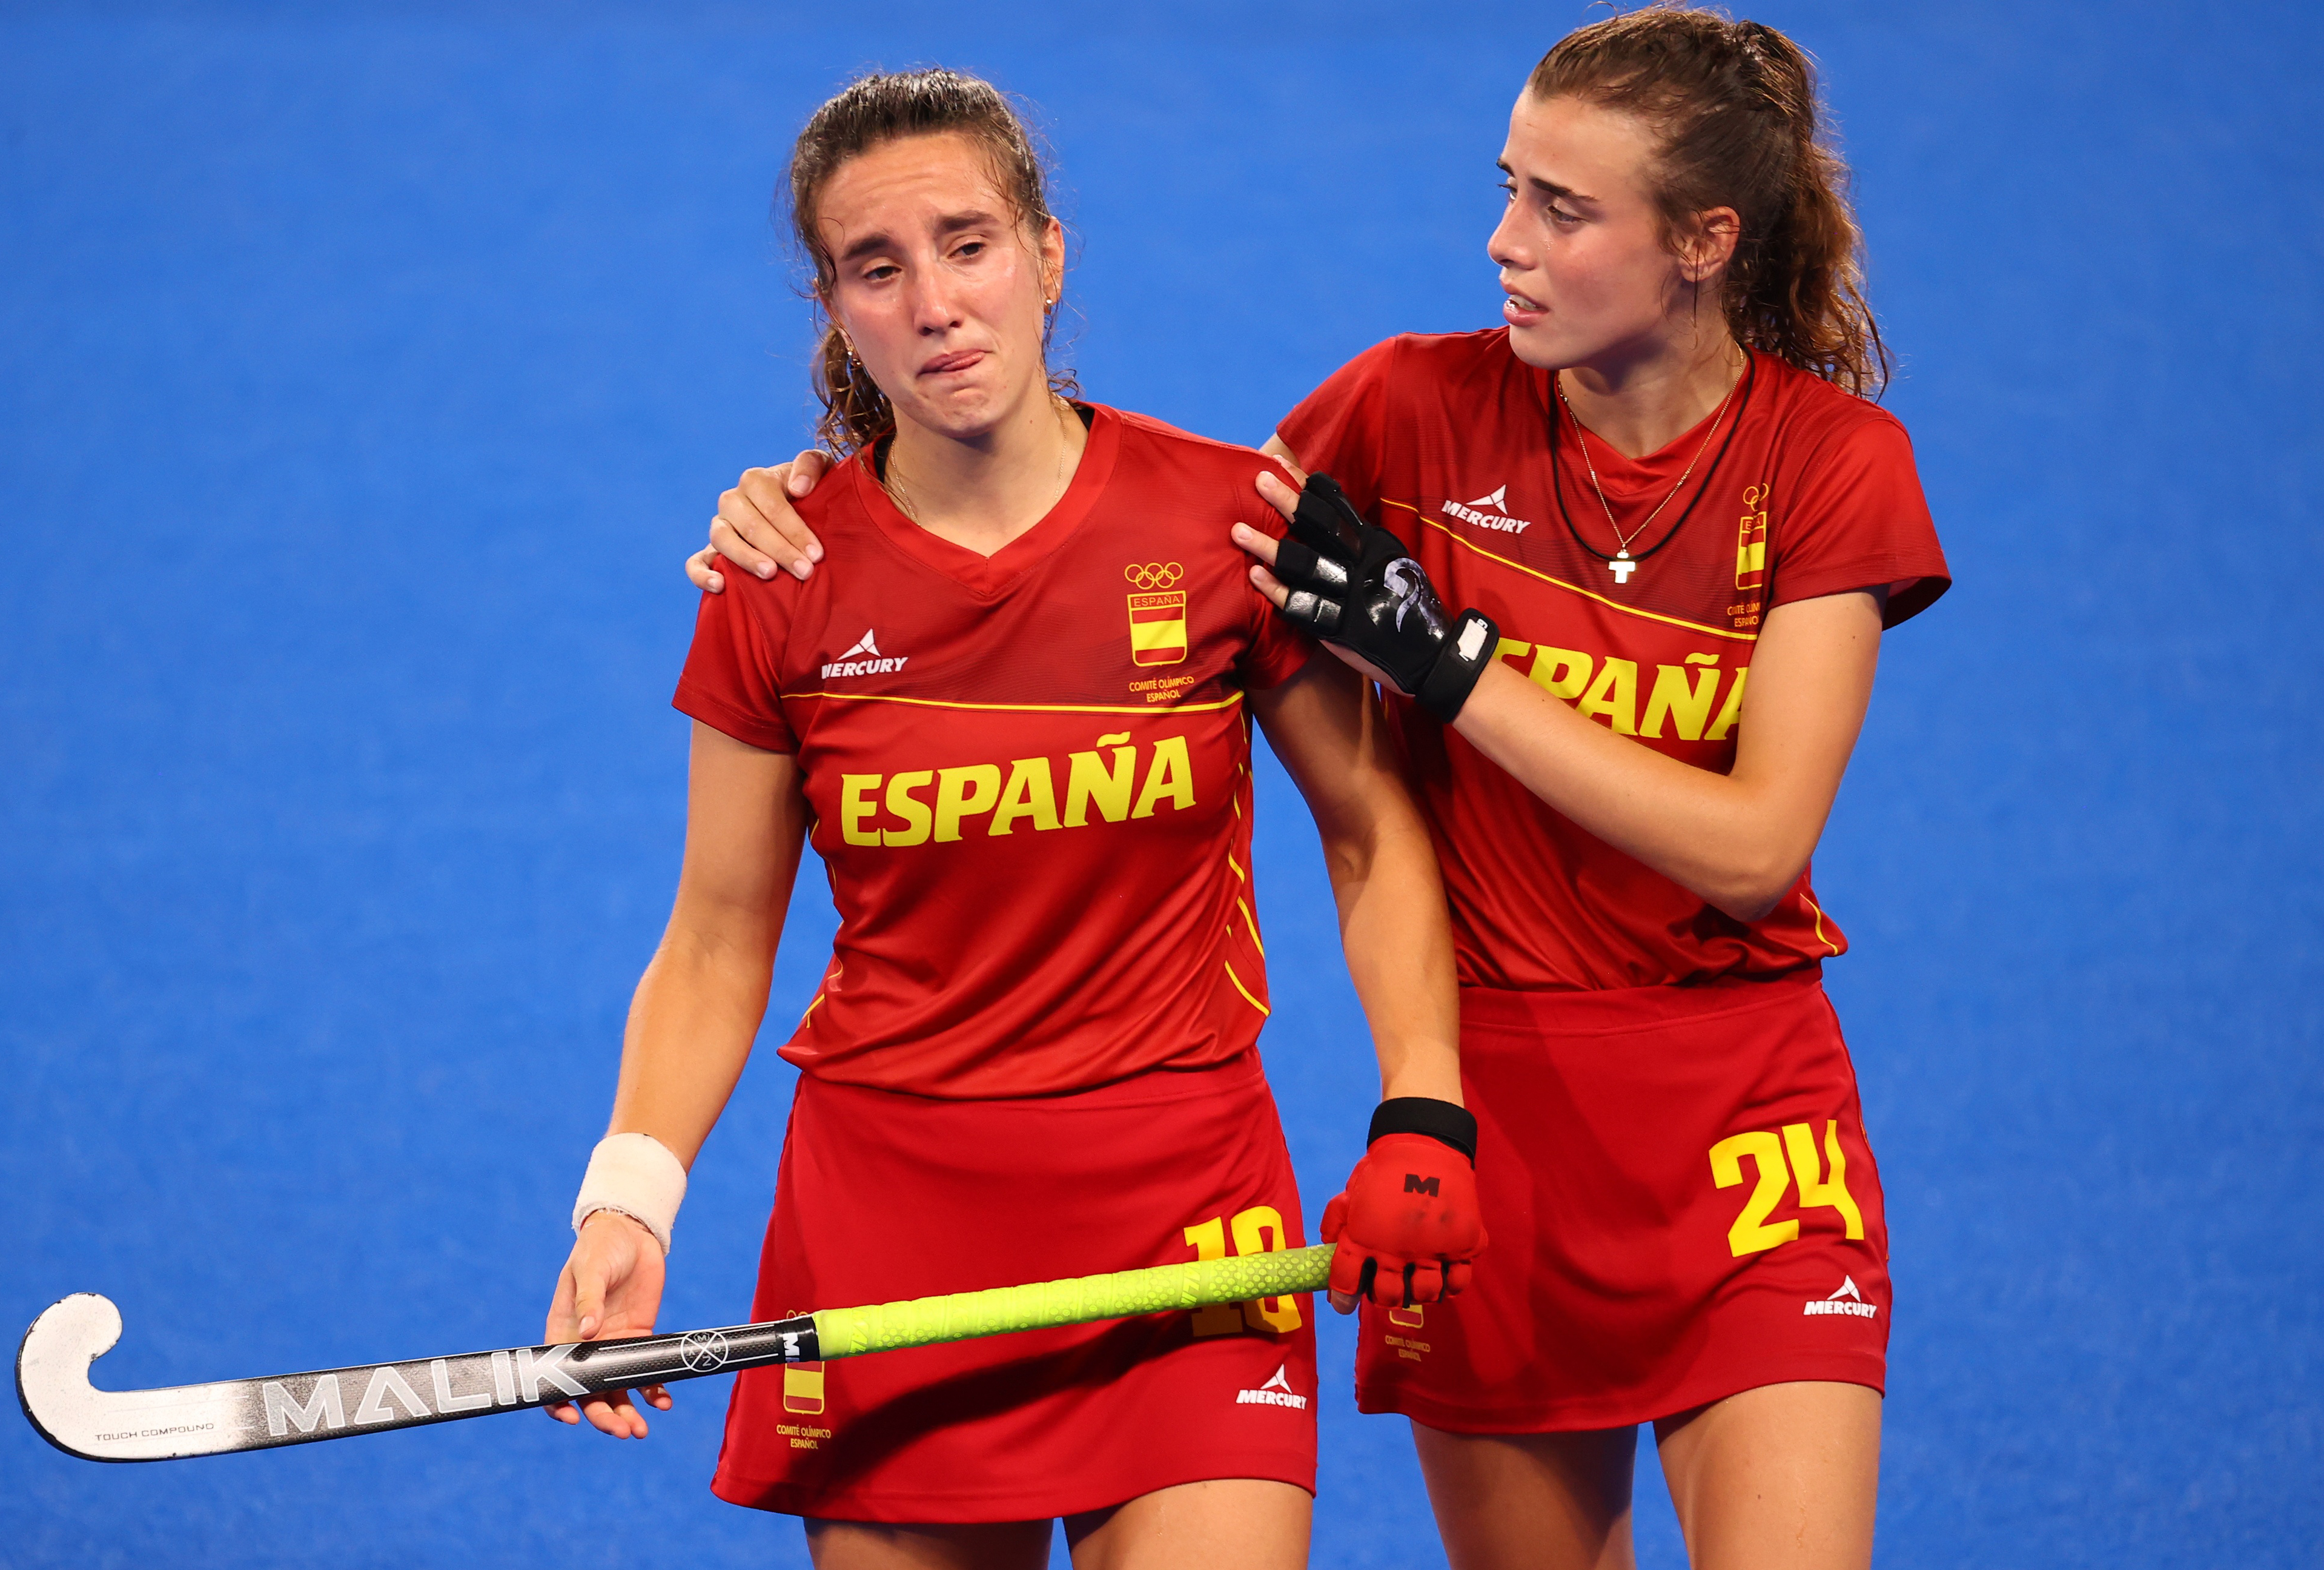 Olympics-Hockey-Britain defeats Spain after penalty shootout to reach semis